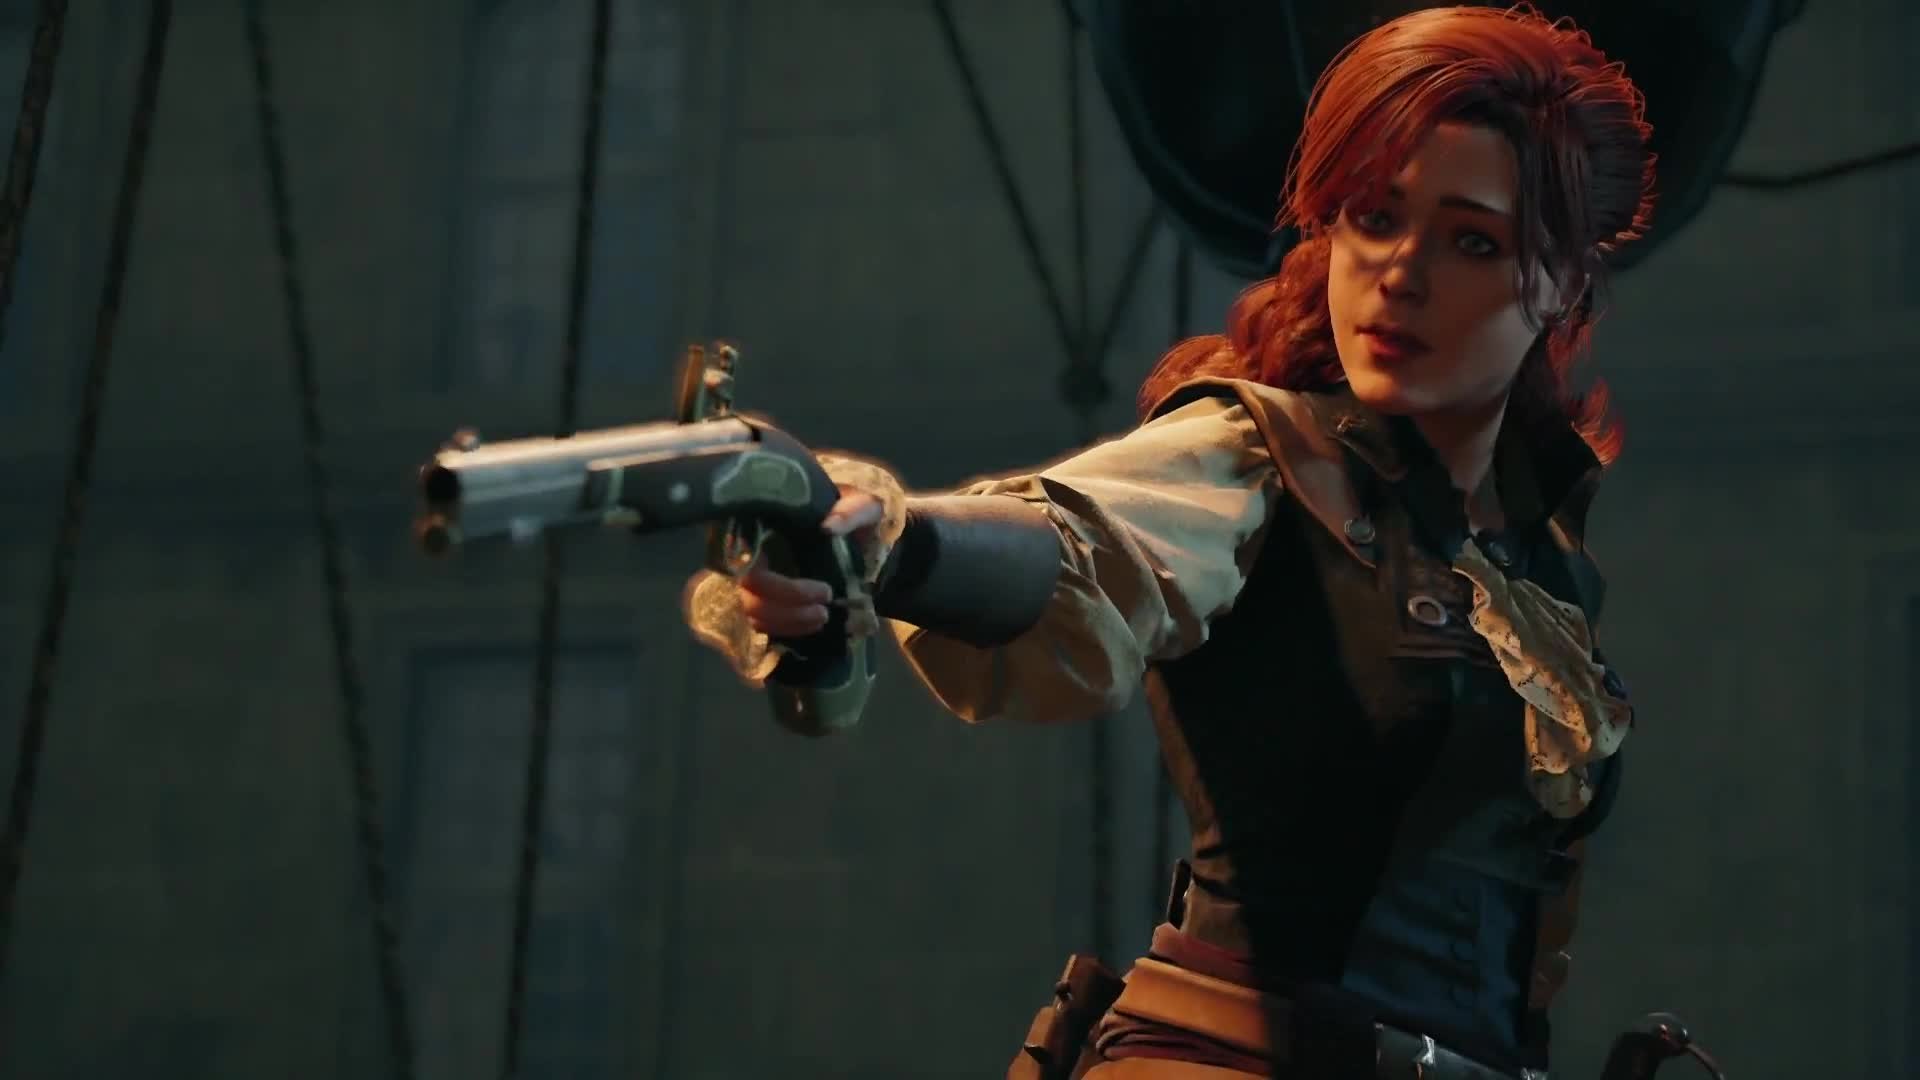 Assassin's Creed Unity: Cast of Characters, Trailer